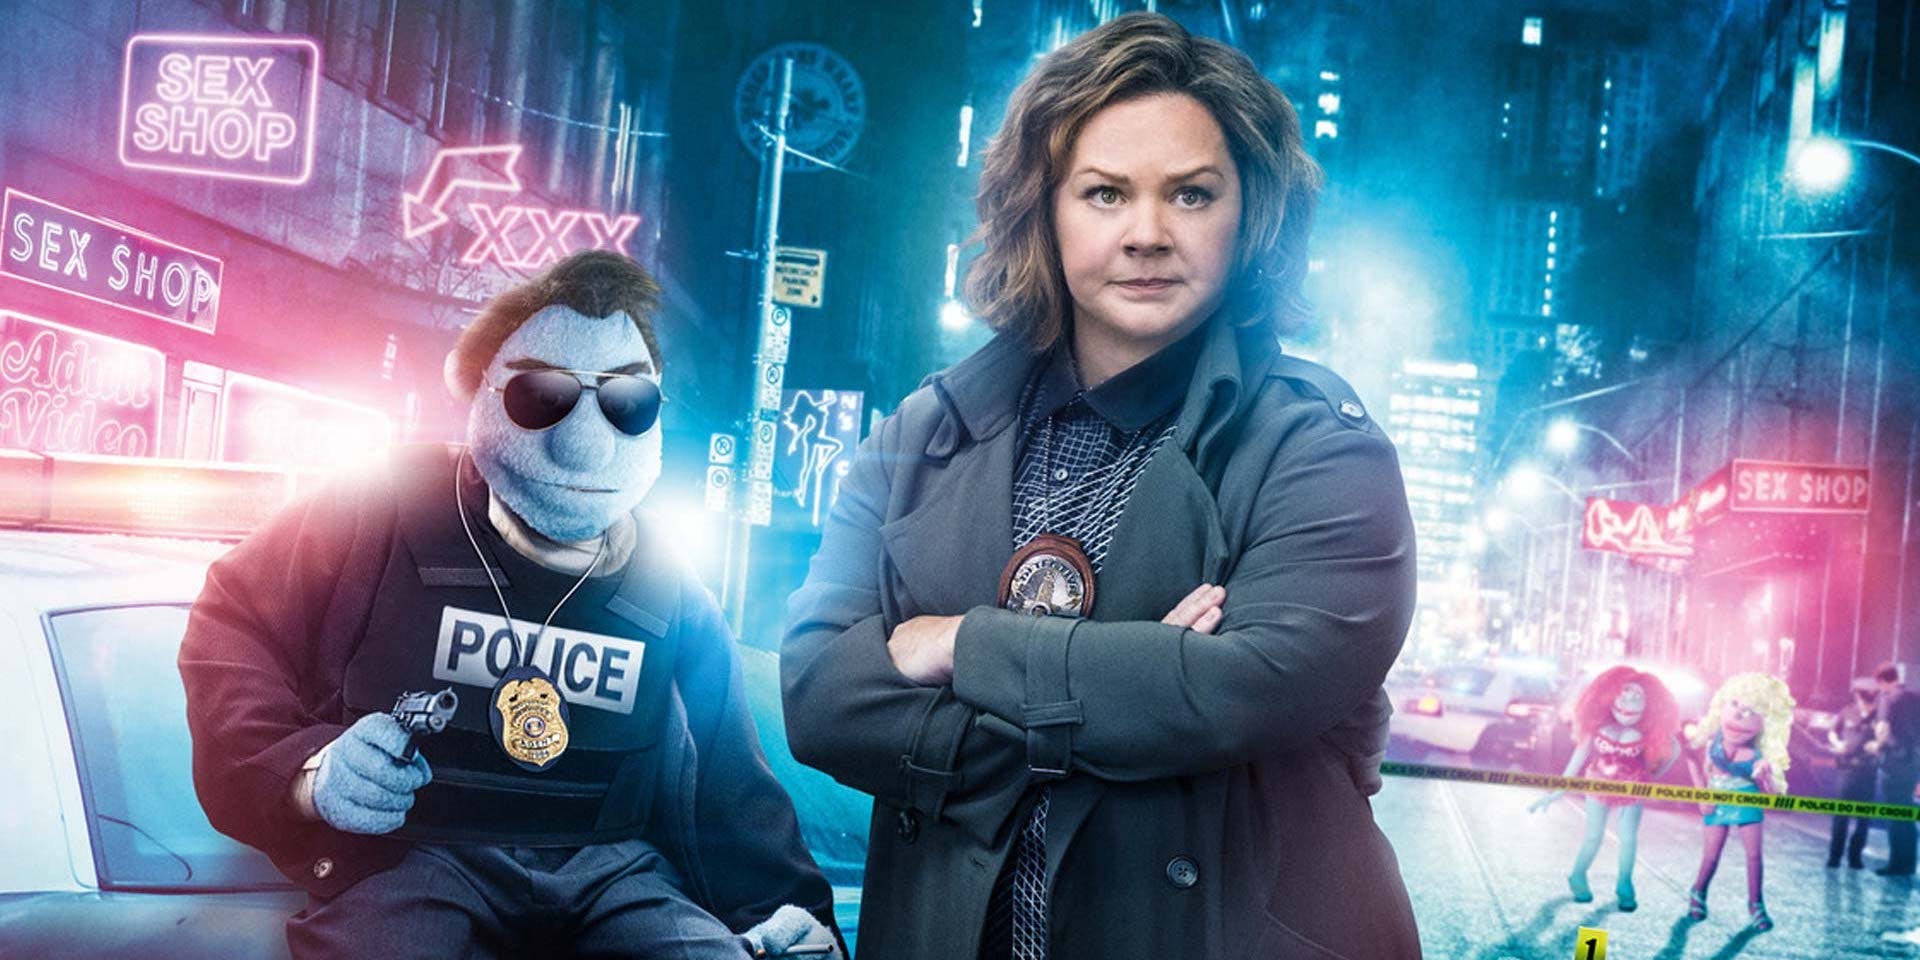 The Happytime Murders Review: Has its moments, but could've been a lot better